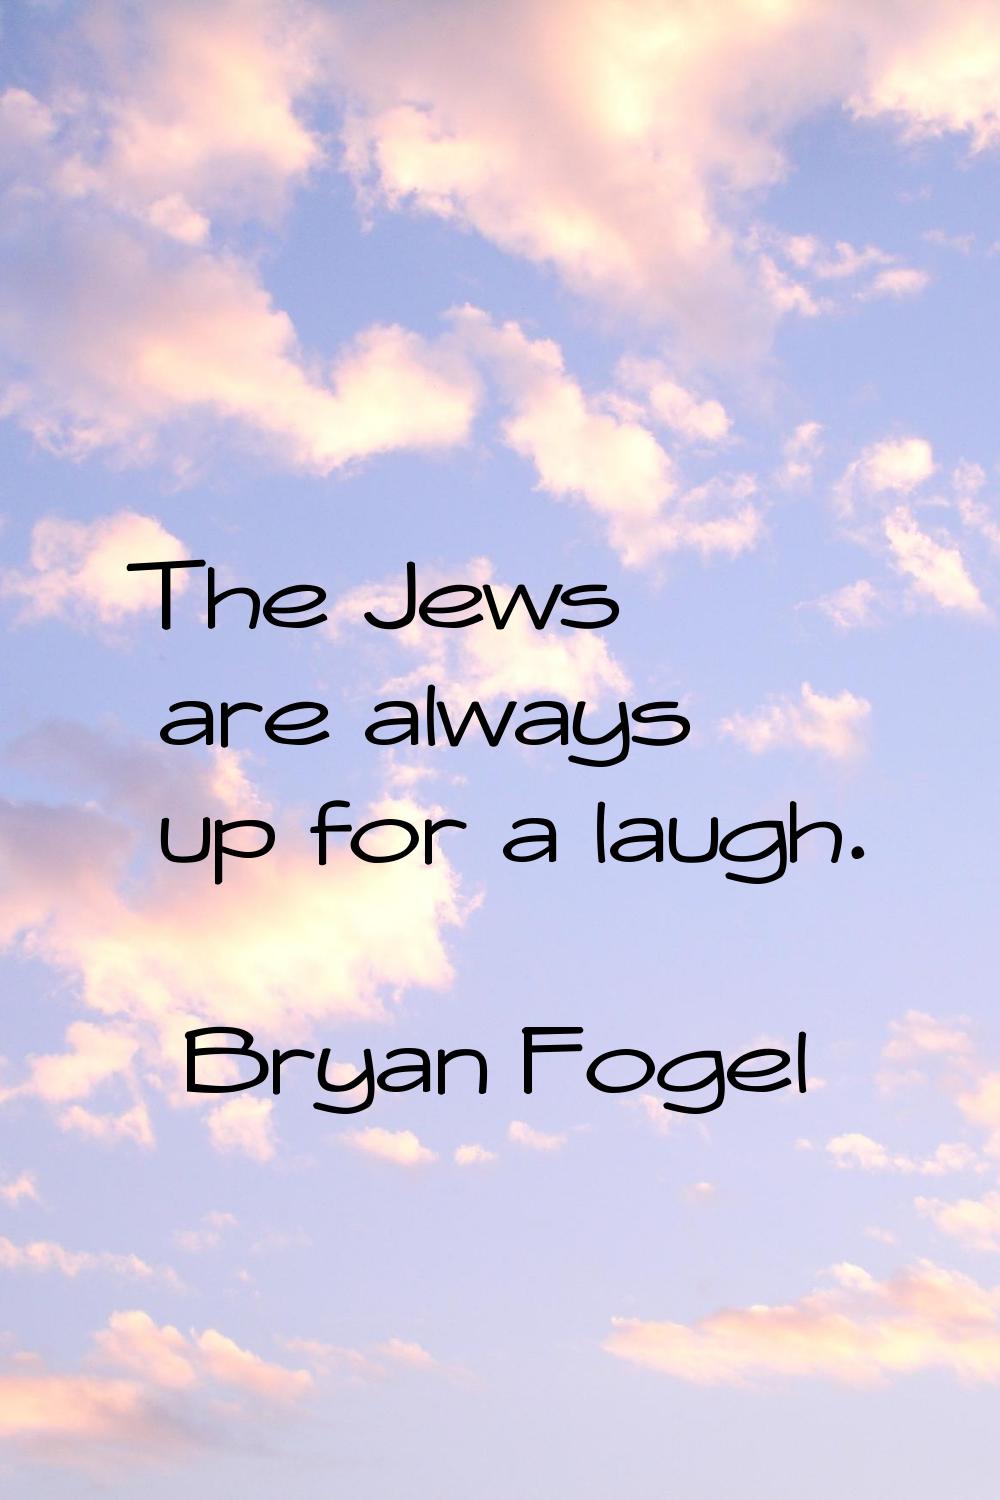 The Jews are always up for a laugh.